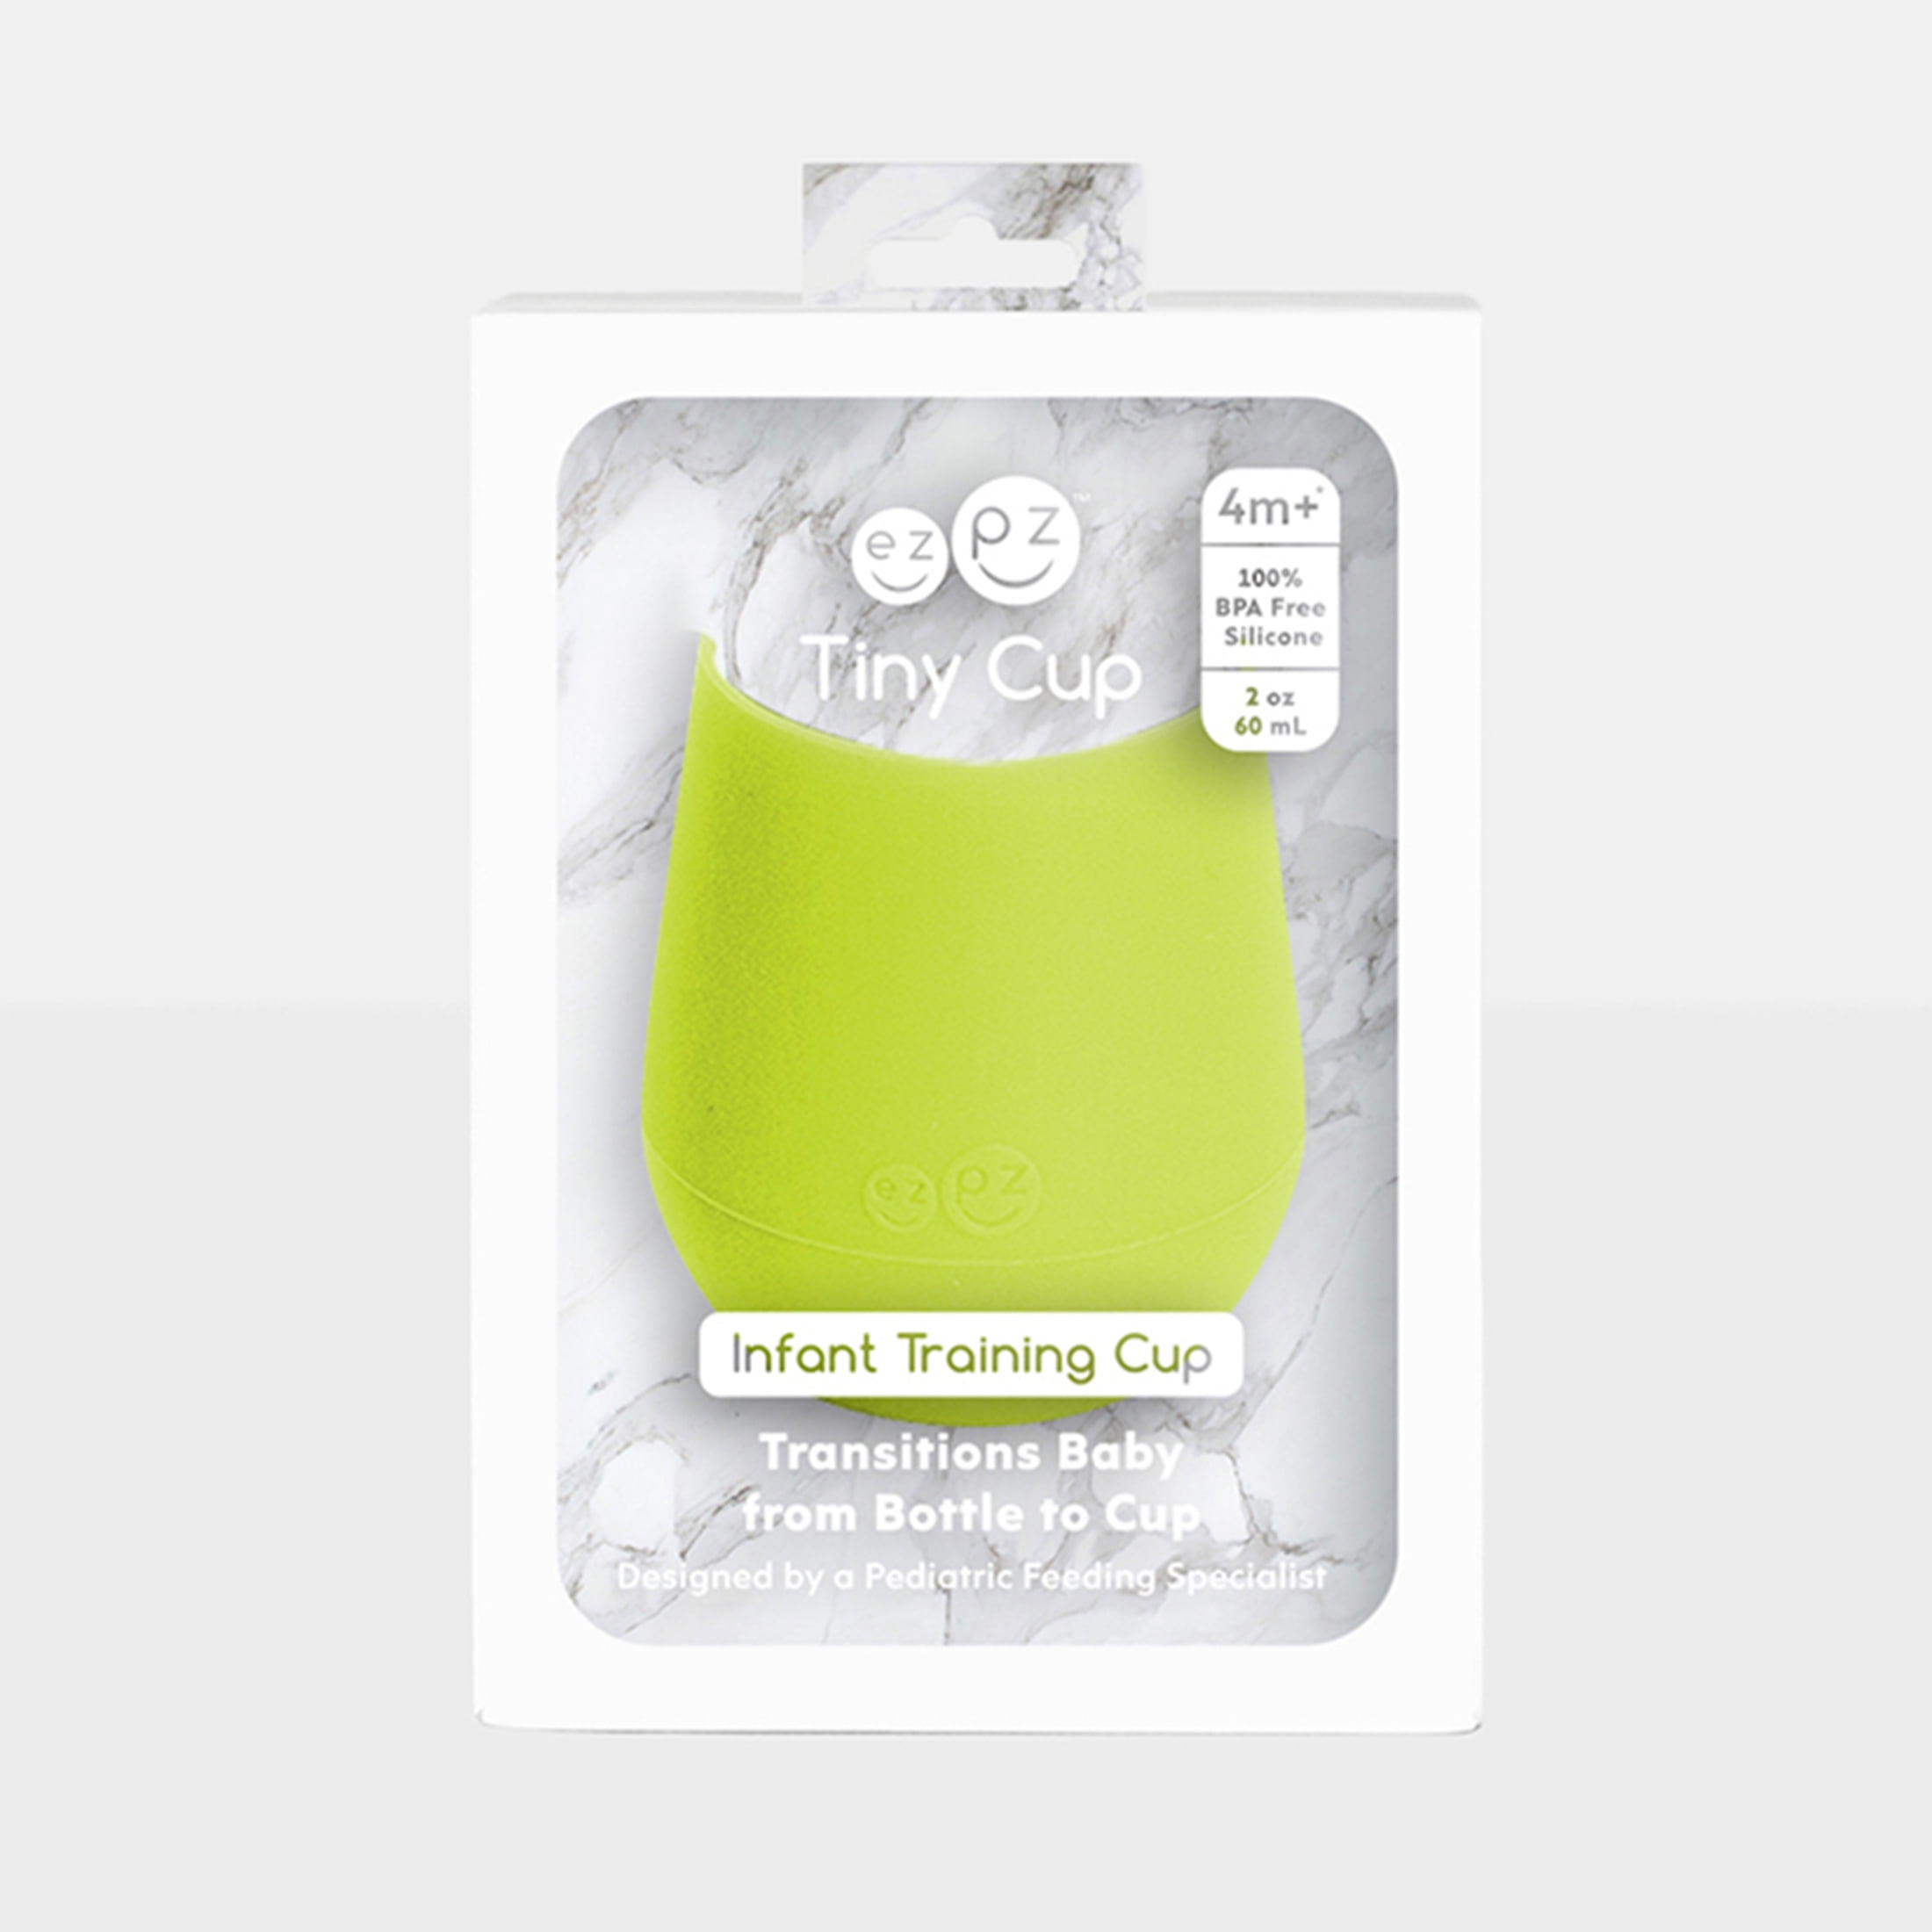 ezpz Tiny Cup (Lime) - 100% Silicone Training Cup for Infants - 6 months +  - Designed by a Pediatric Feeding Specialist - Baby-led Weaning Essentials